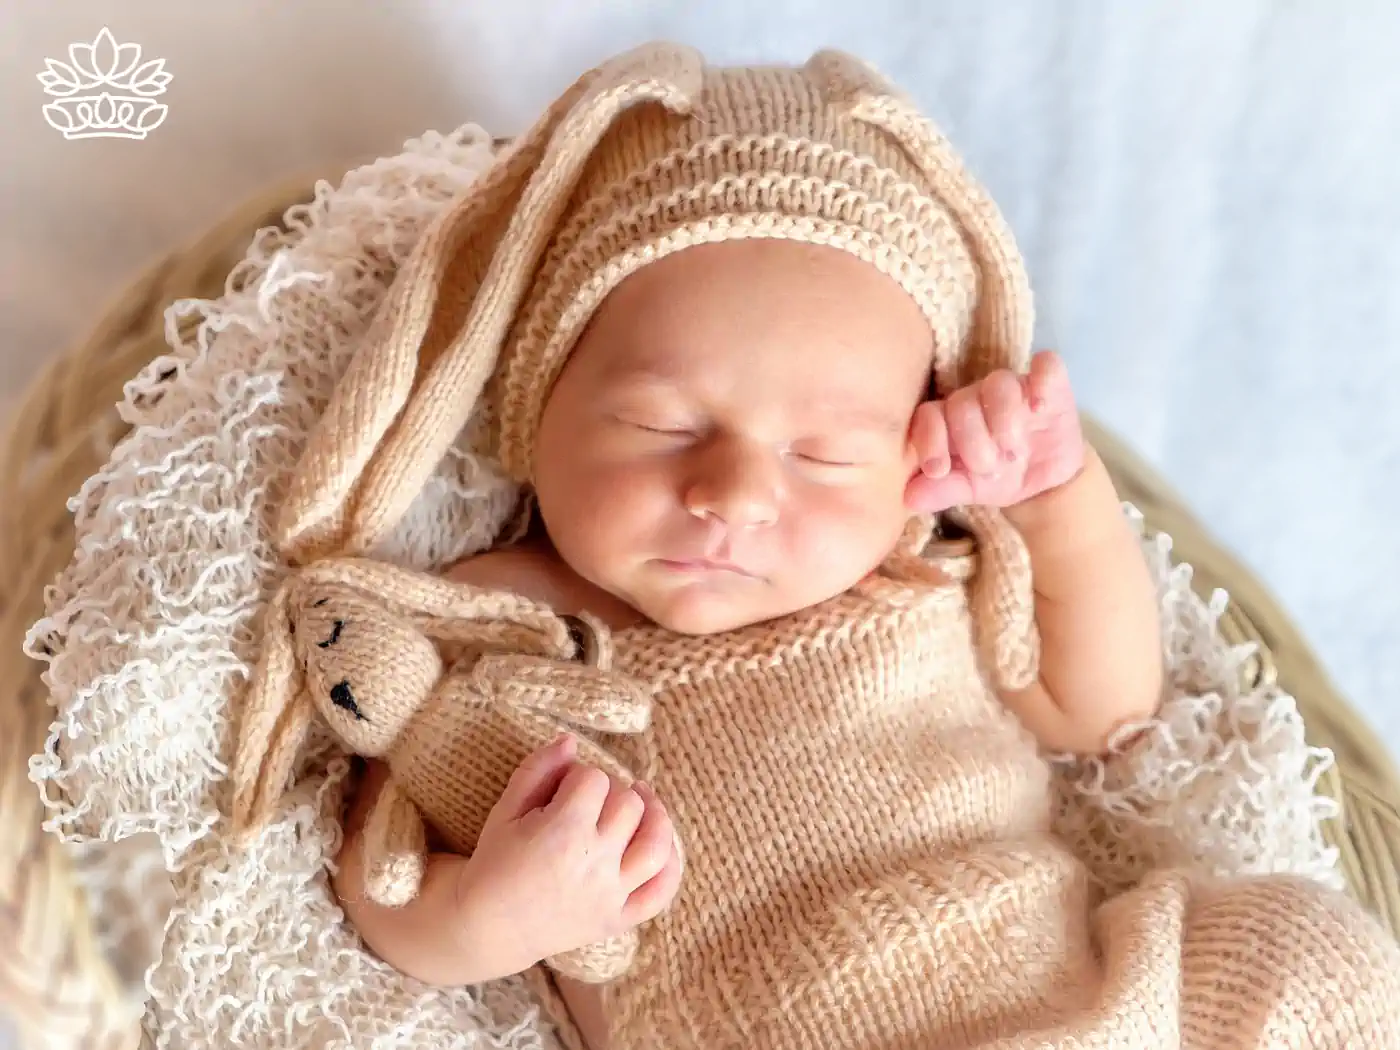 Newborn baby in knitted bunny outfit holding a matching stuffed toy, Fabulous Flowers and Gifts, Newborn Baby Gift Boxes